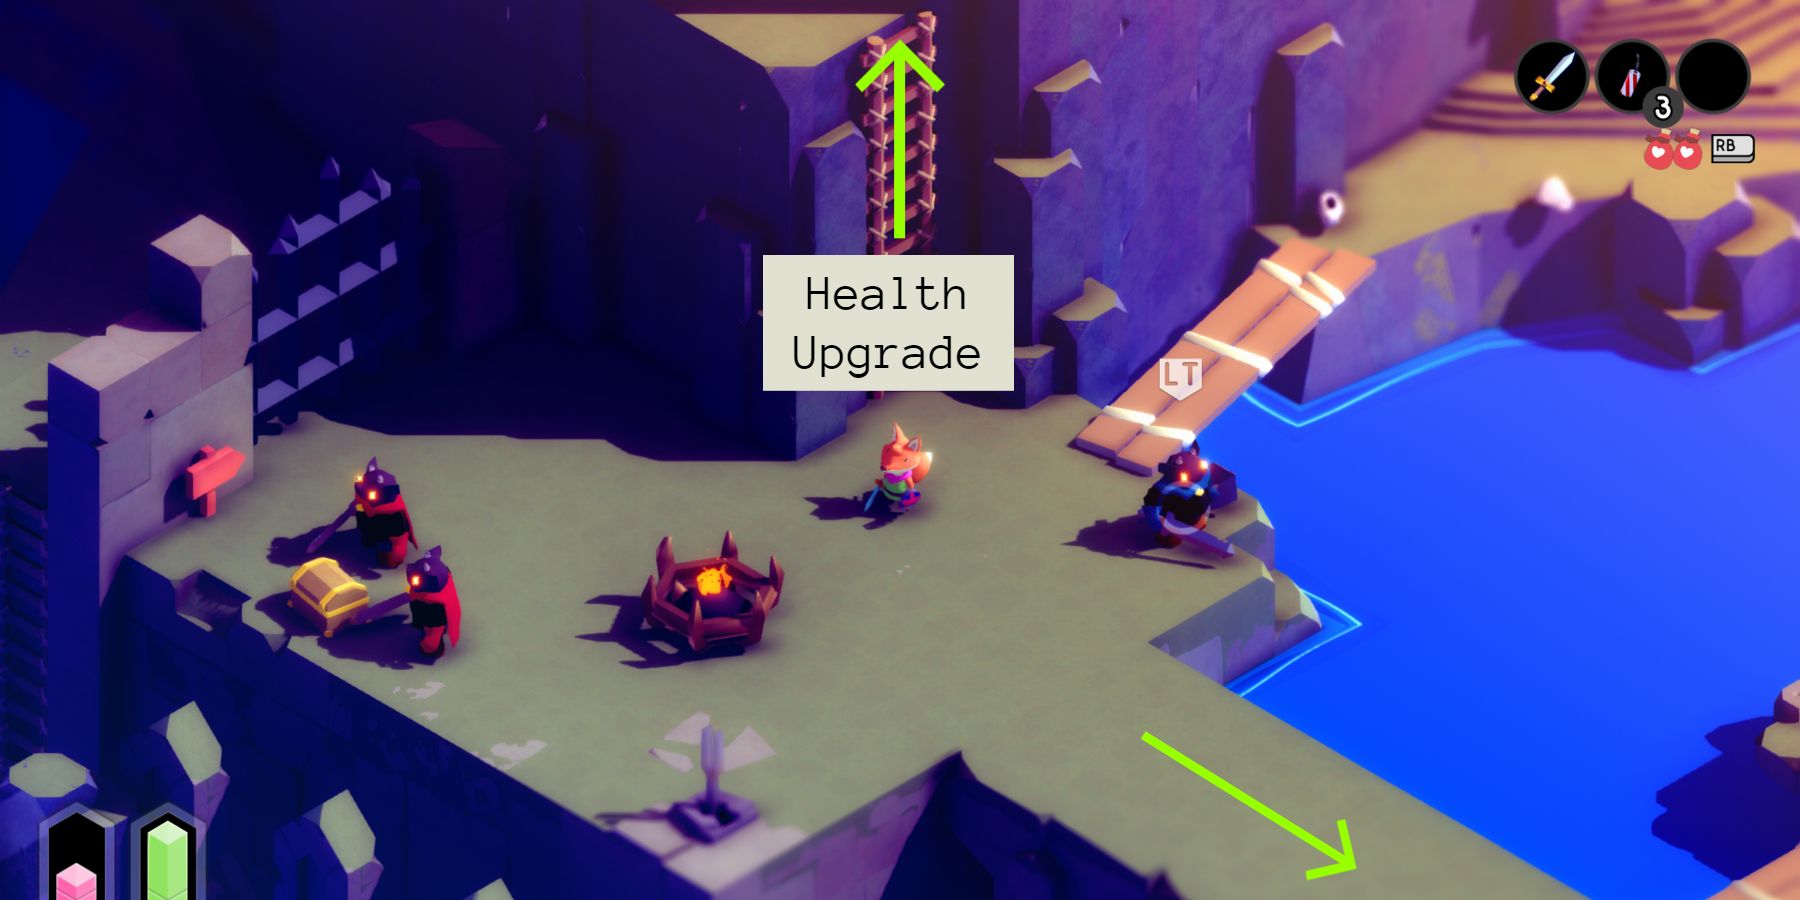 a red fox standing on a wide ledge with several, demonic knights standing nearby. a fire is lit in a brazier and an arrow points up a nearby ladder with the words "health upgrade" underneath. another green arrow points down and to the right. 